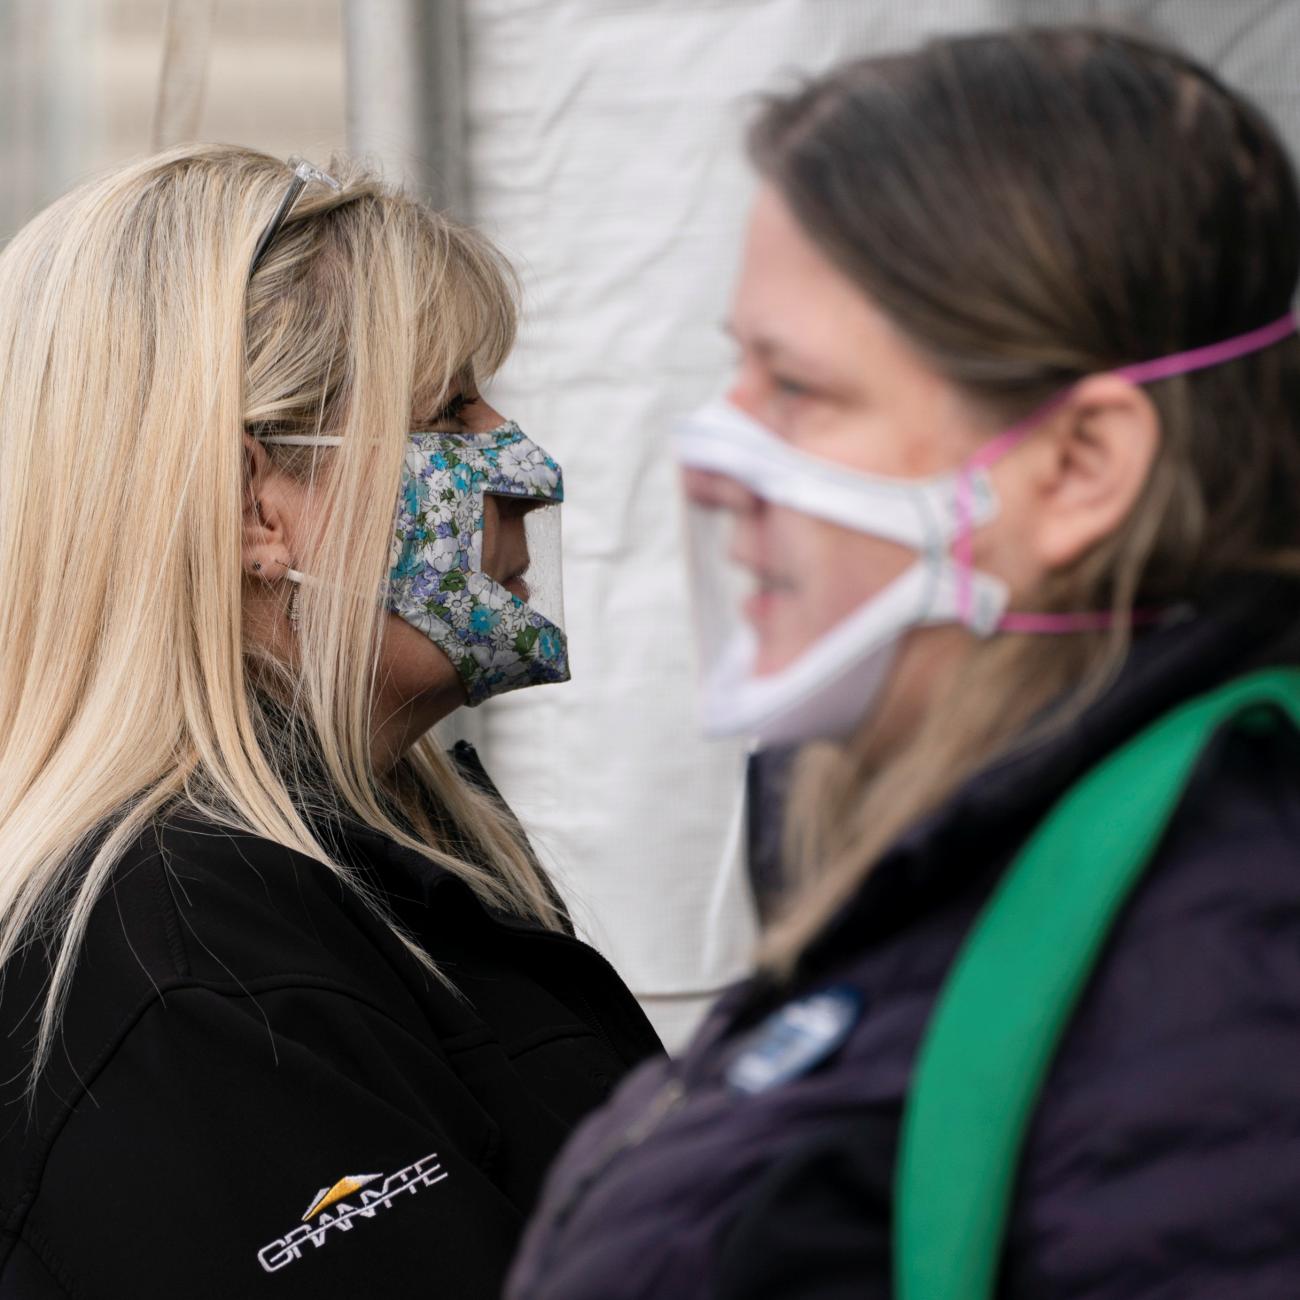 Interpreters wait at the entrance of a mobile coronavirus disease (COVID-19) vaccination clinic for members of the deaf and blind community, organized by the Swedish Medical Center in Seattle, Washington, U.S., March 19, 2021.